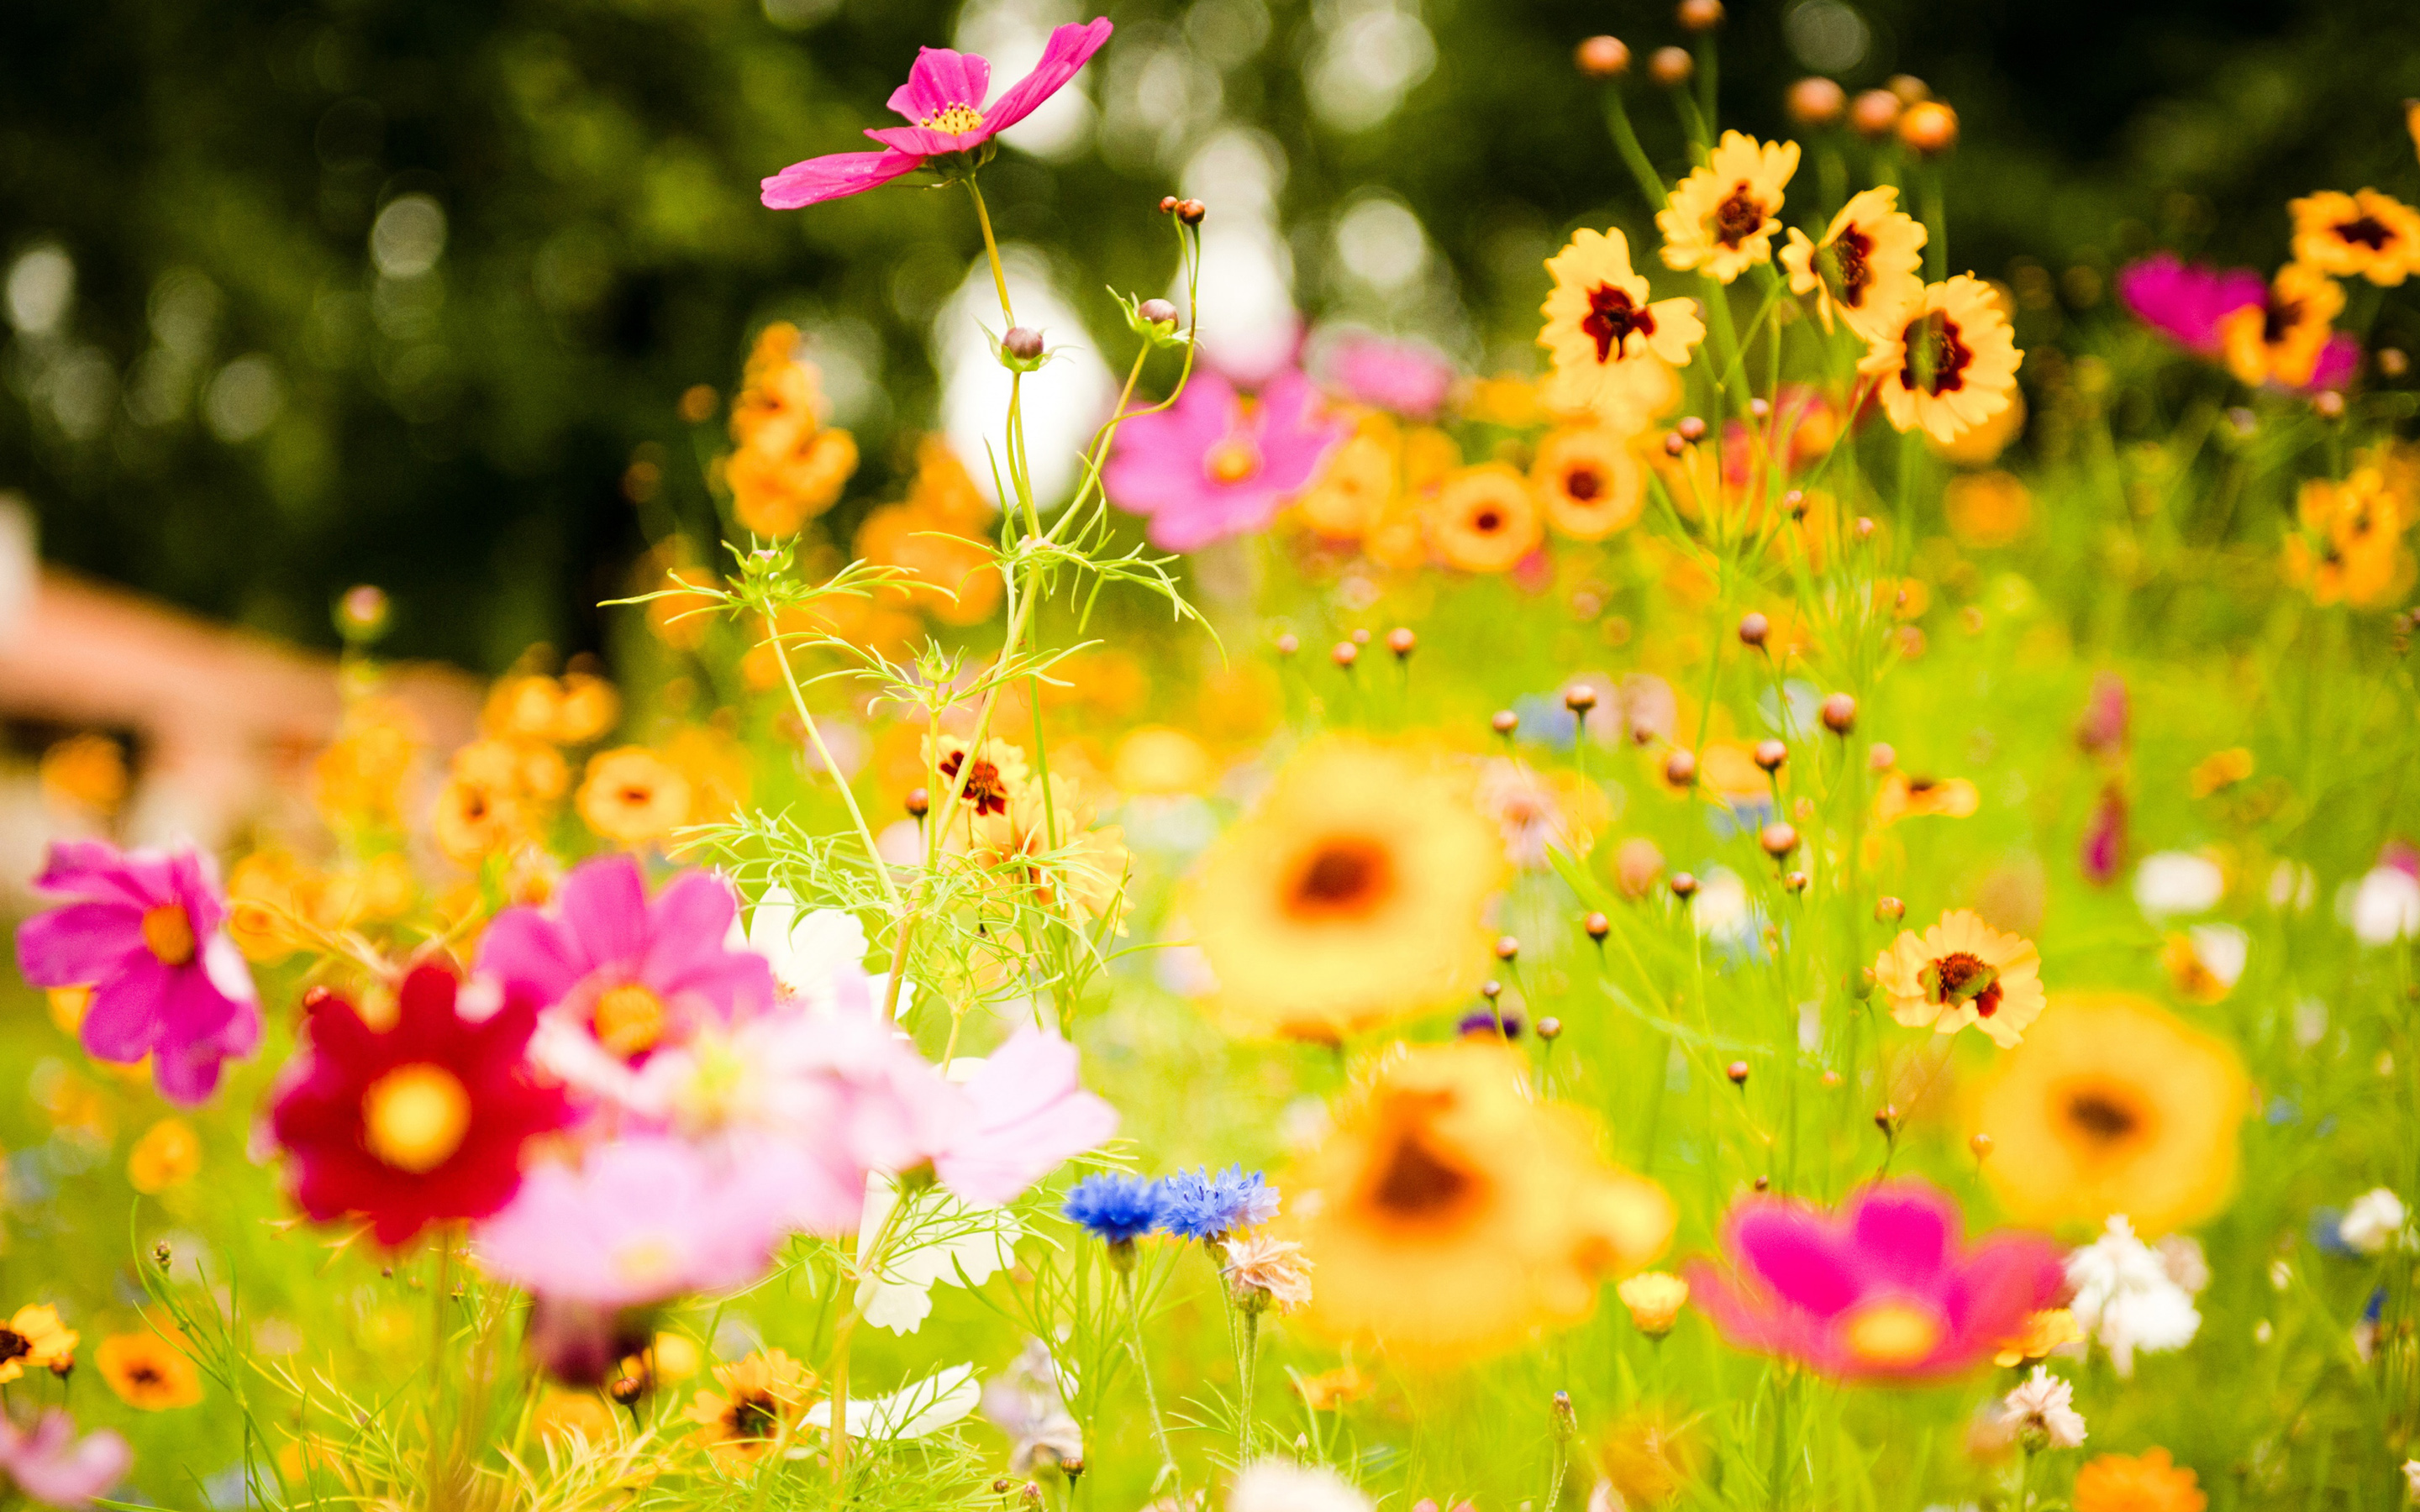 Description Download Colorful Flowers WallpaperBackground in